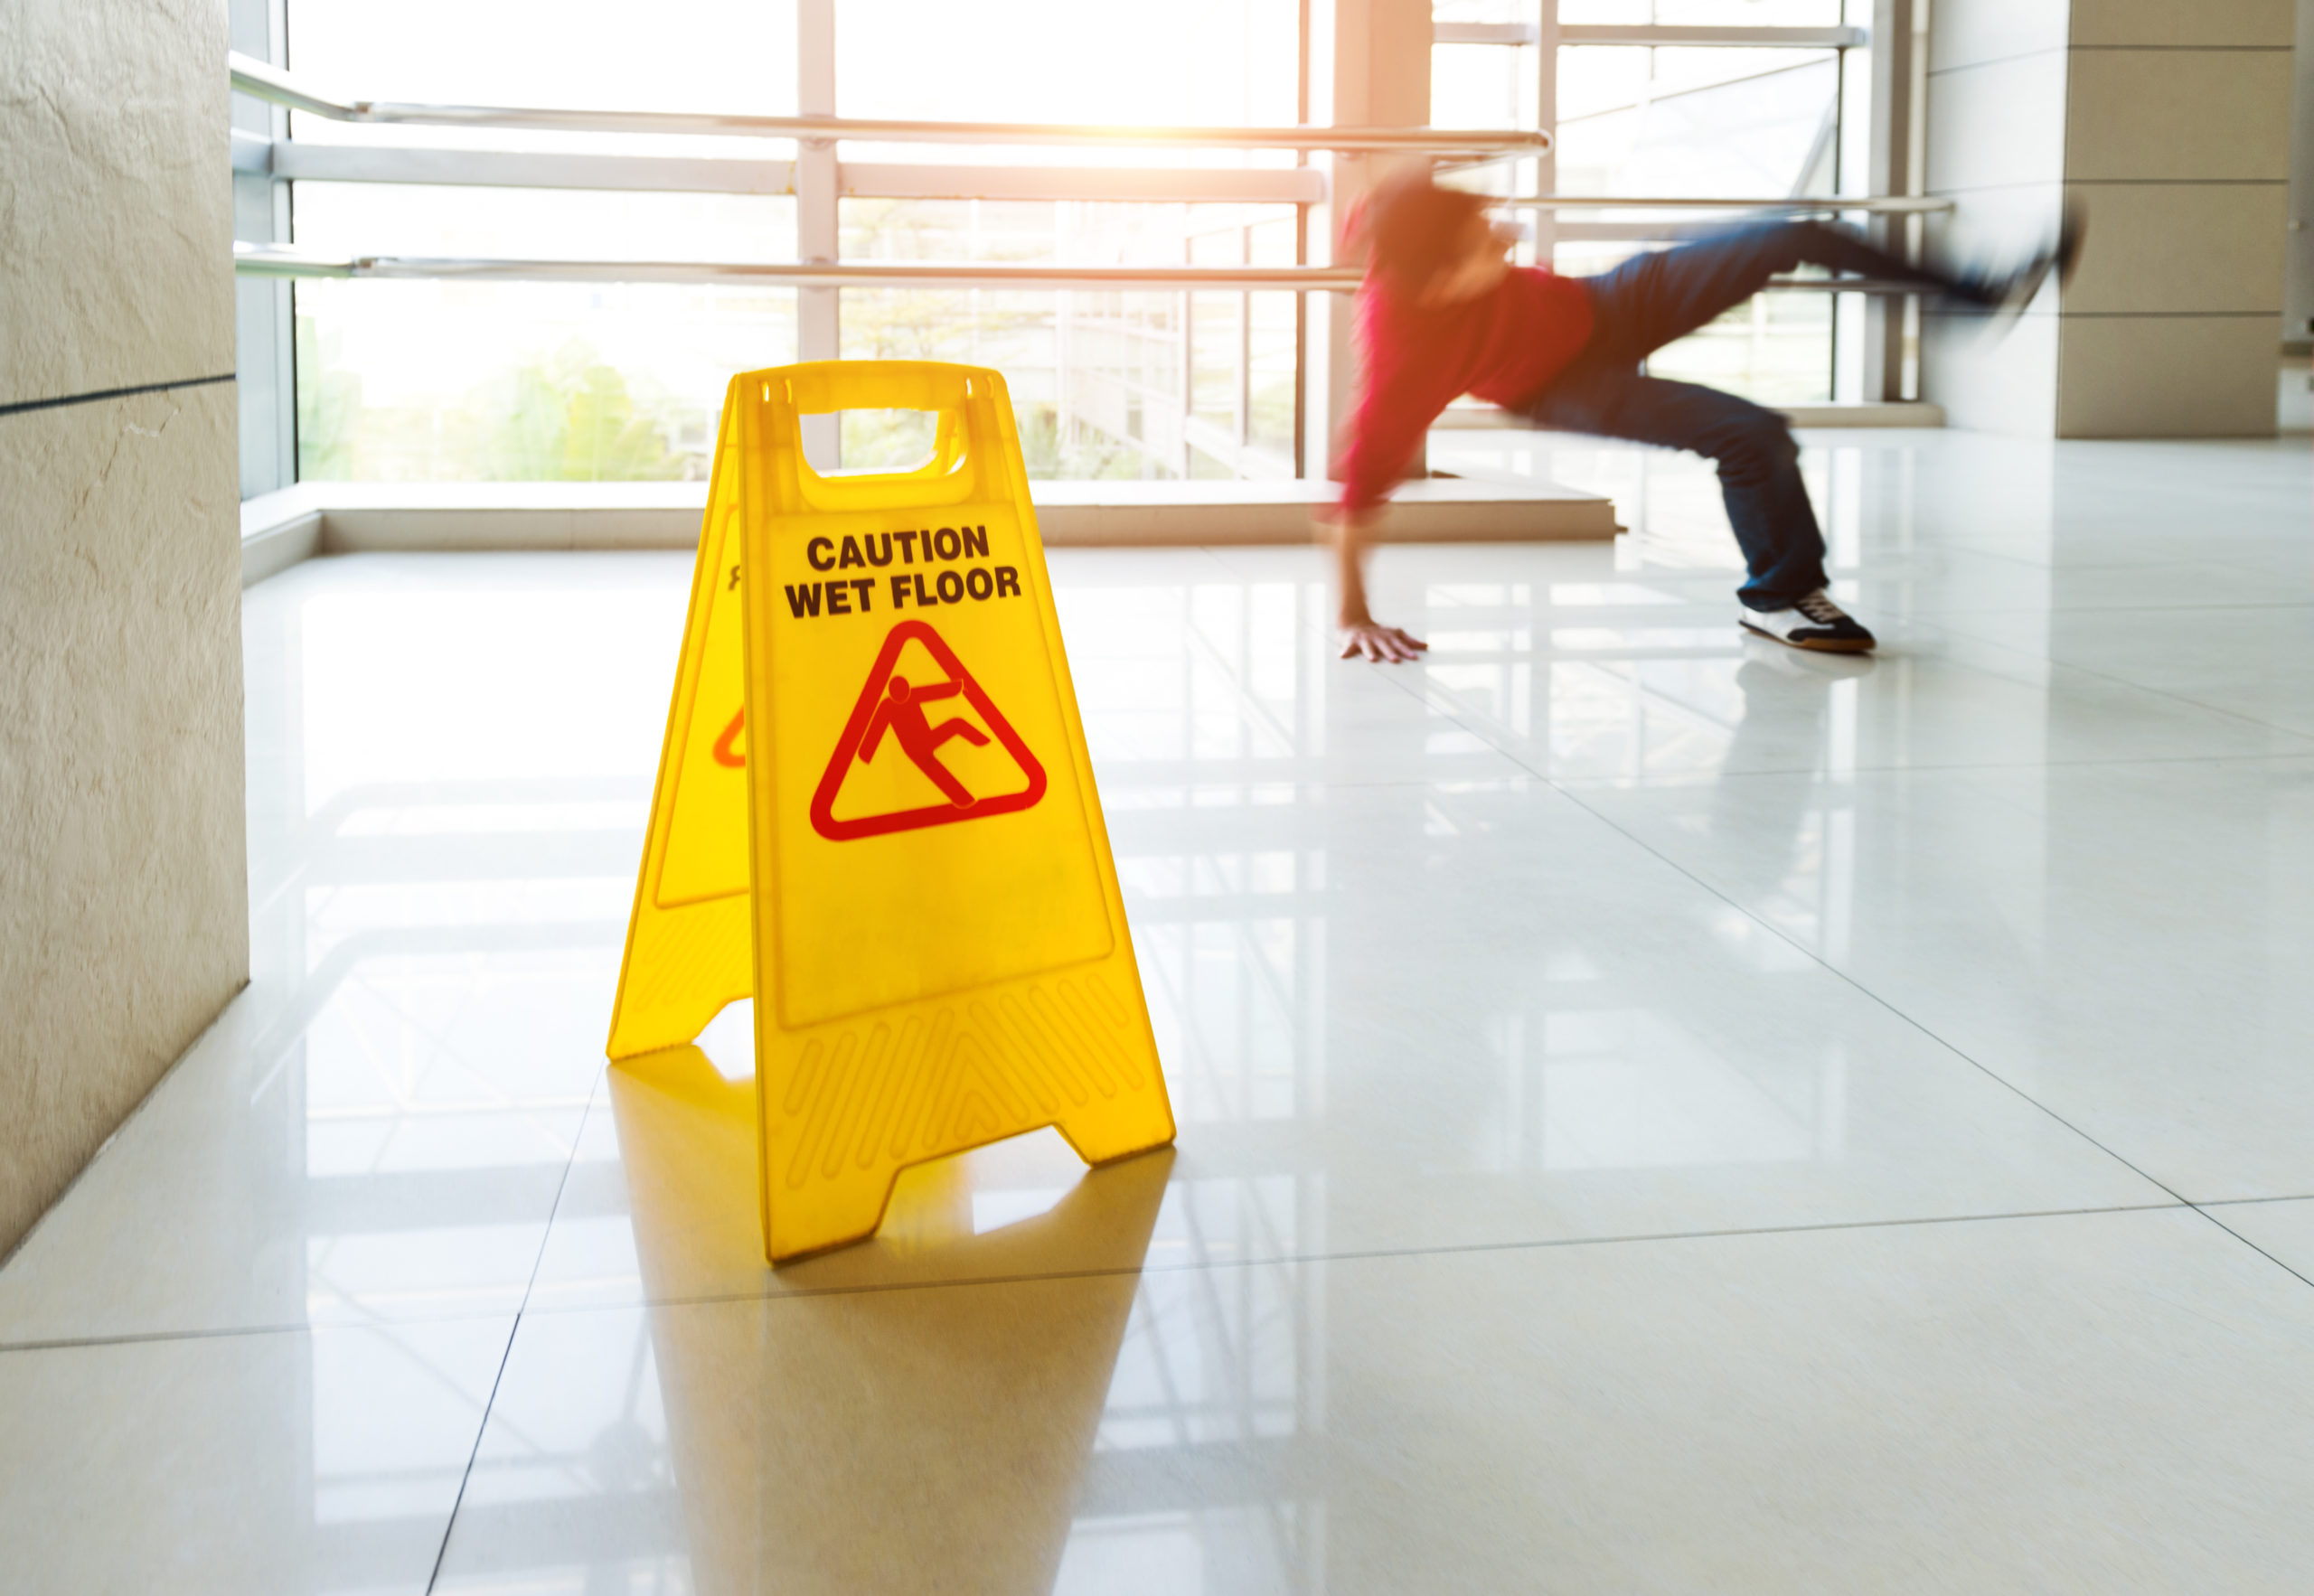 How to File a Slip and Fall Claim in California